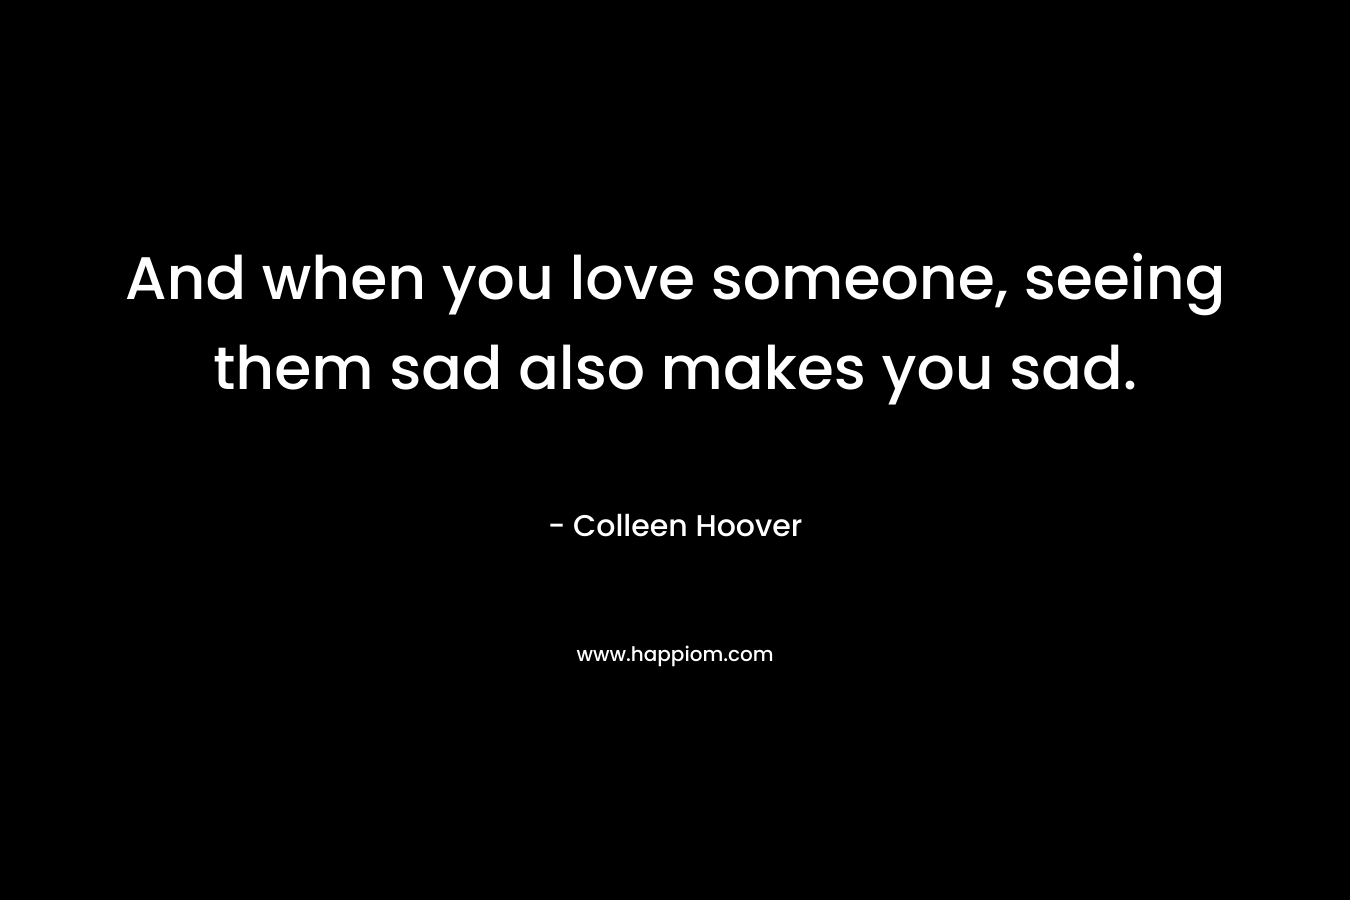 And when you love someone, seeing them sad also makes you sad.